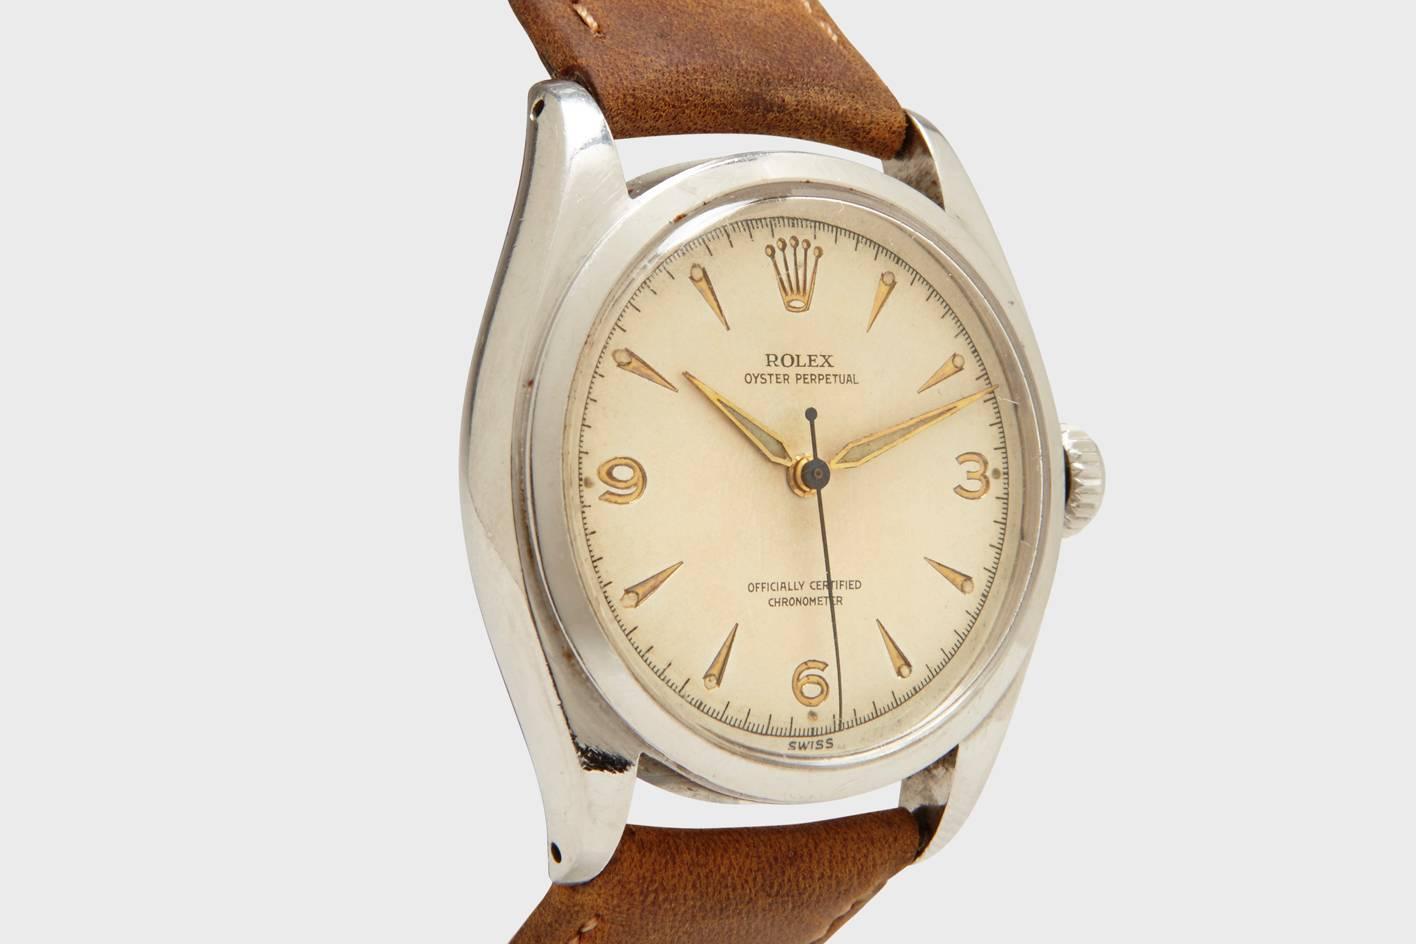 An immaculate and rare stainless steel Rolex Oyster Perpetual with an Explorer style dial. This watch is a very early transitional model as the company stepped away from the smaller, and more bulky sized bubble back models that dominated their